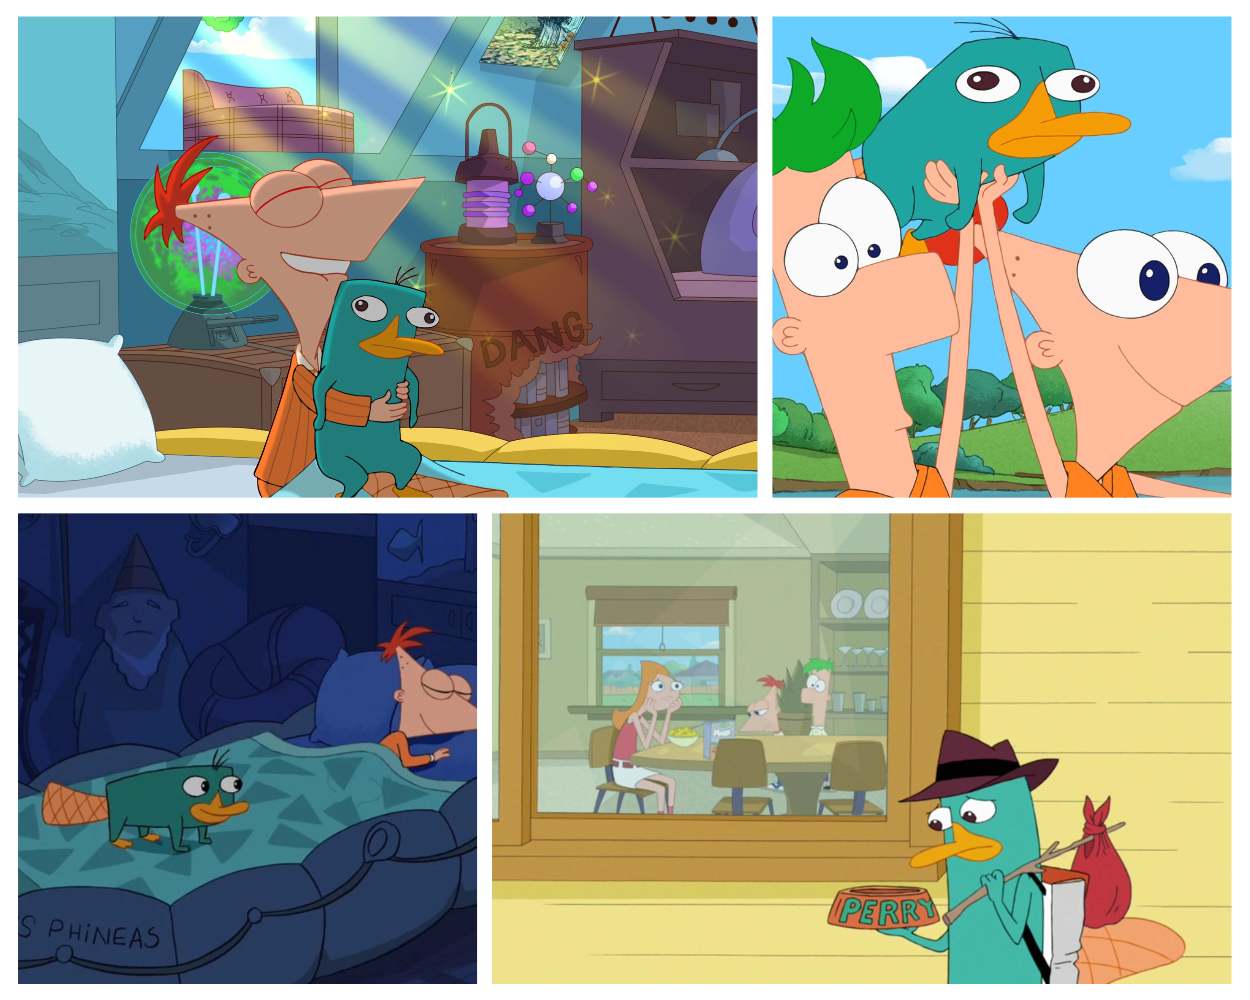 Phineas Flynn and Perry the Platypus